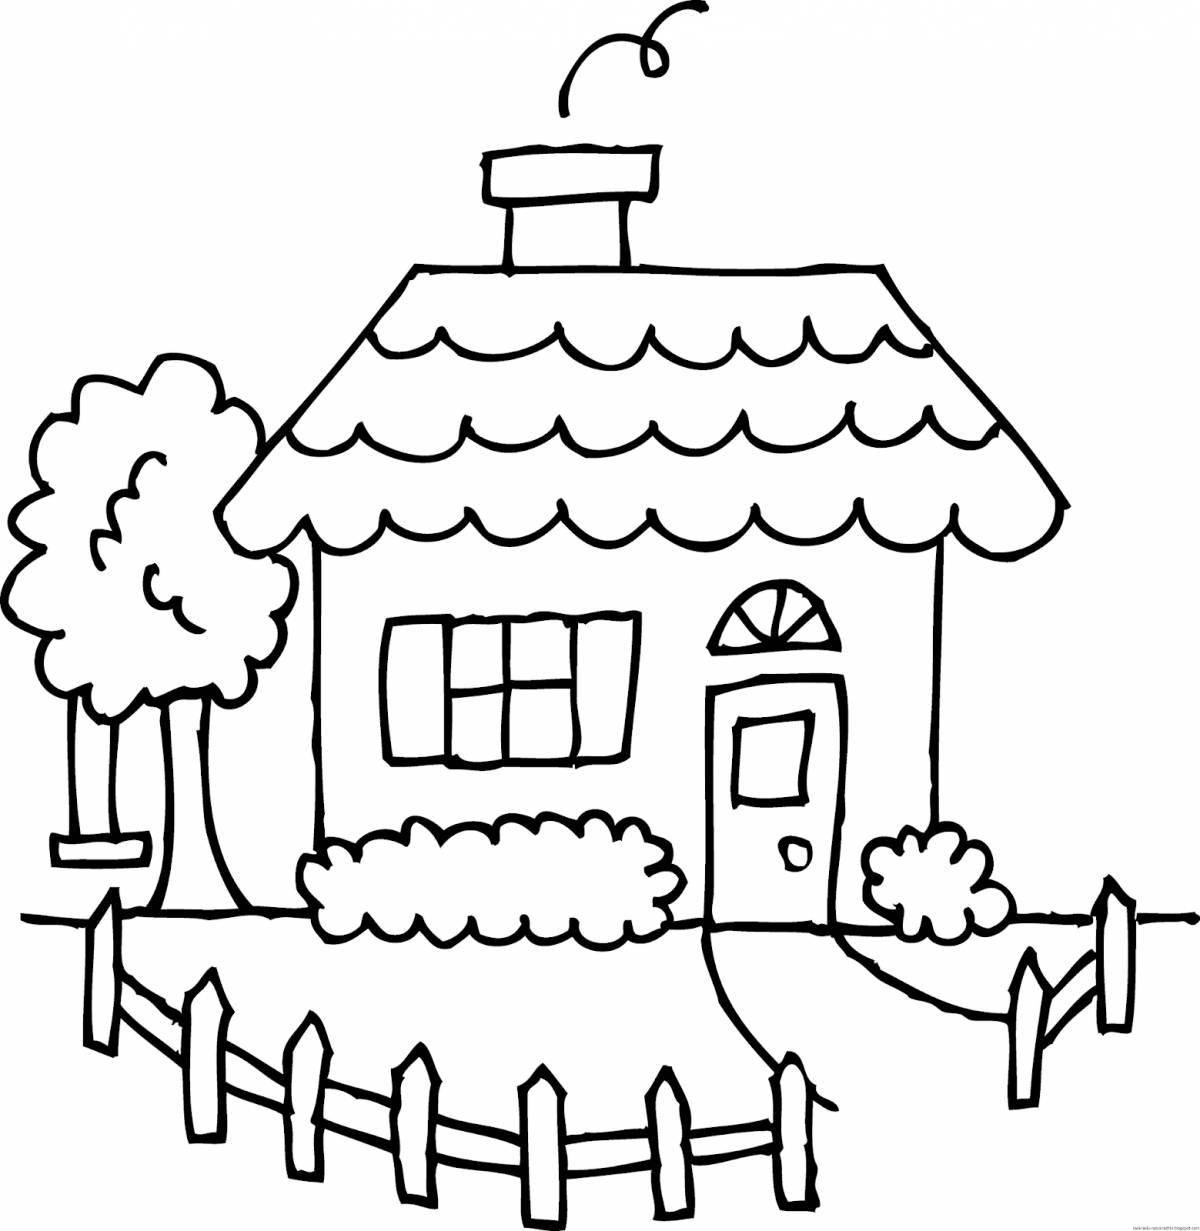 Coloring book sweet houses for children 5-6 years old